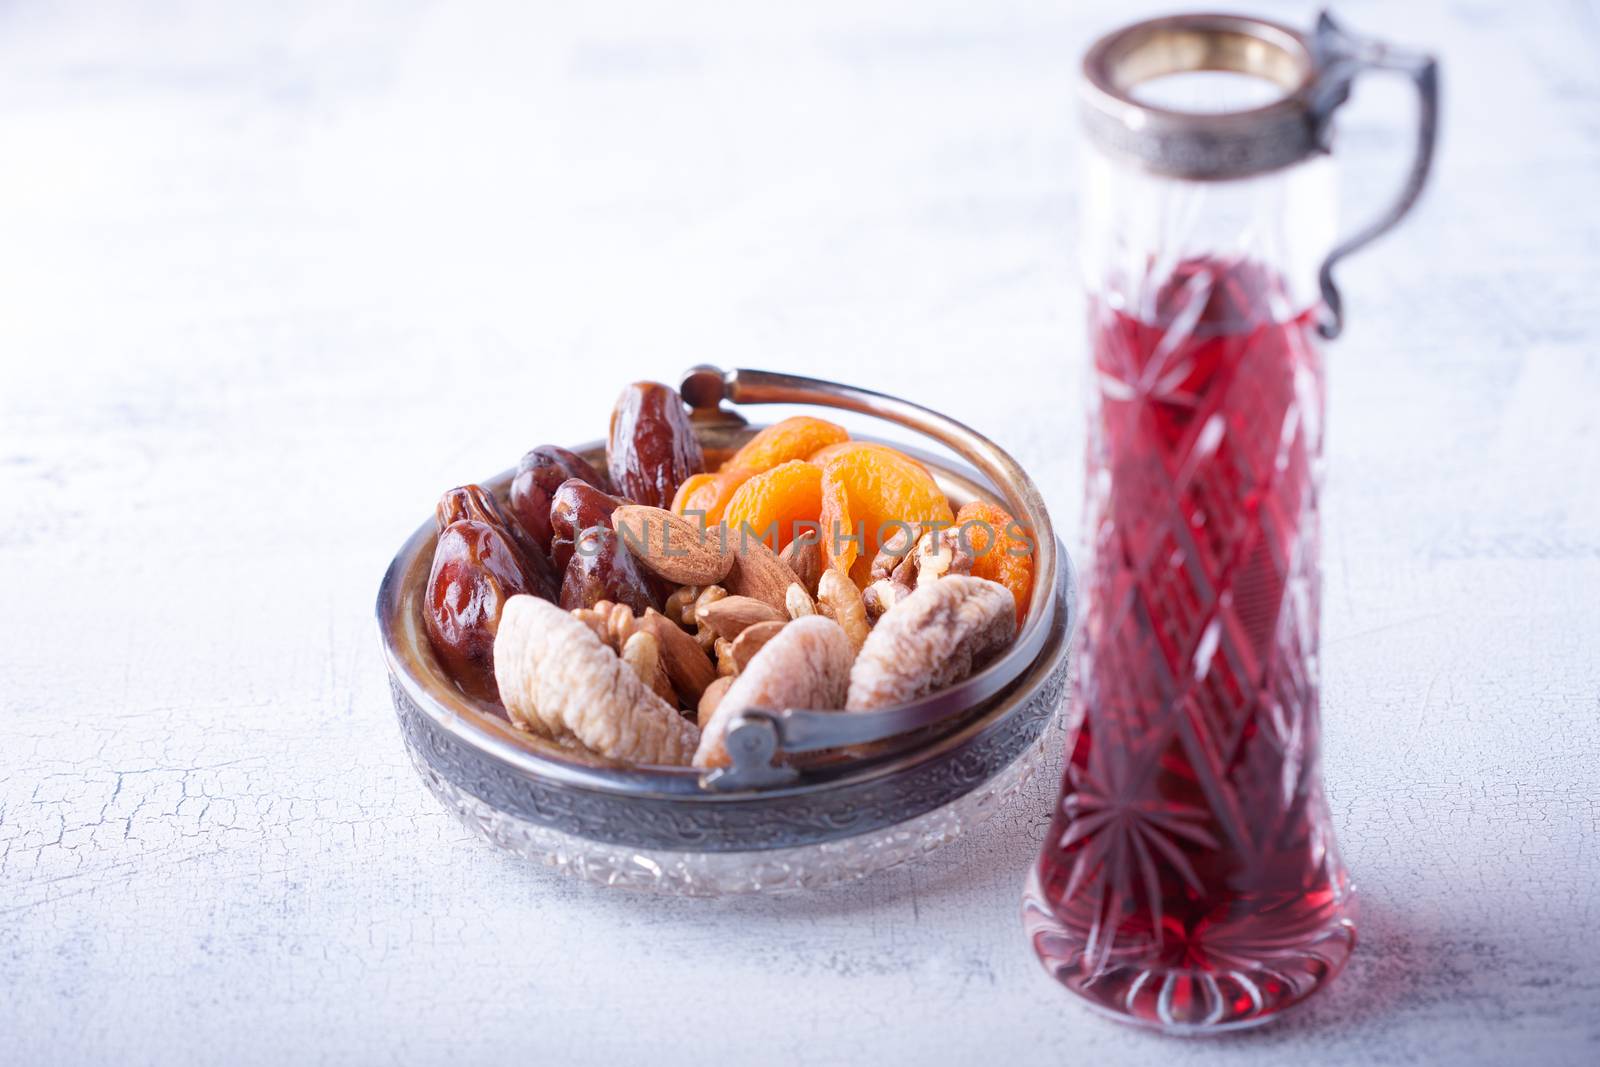 Mixture of dried fruits and nuts on a table